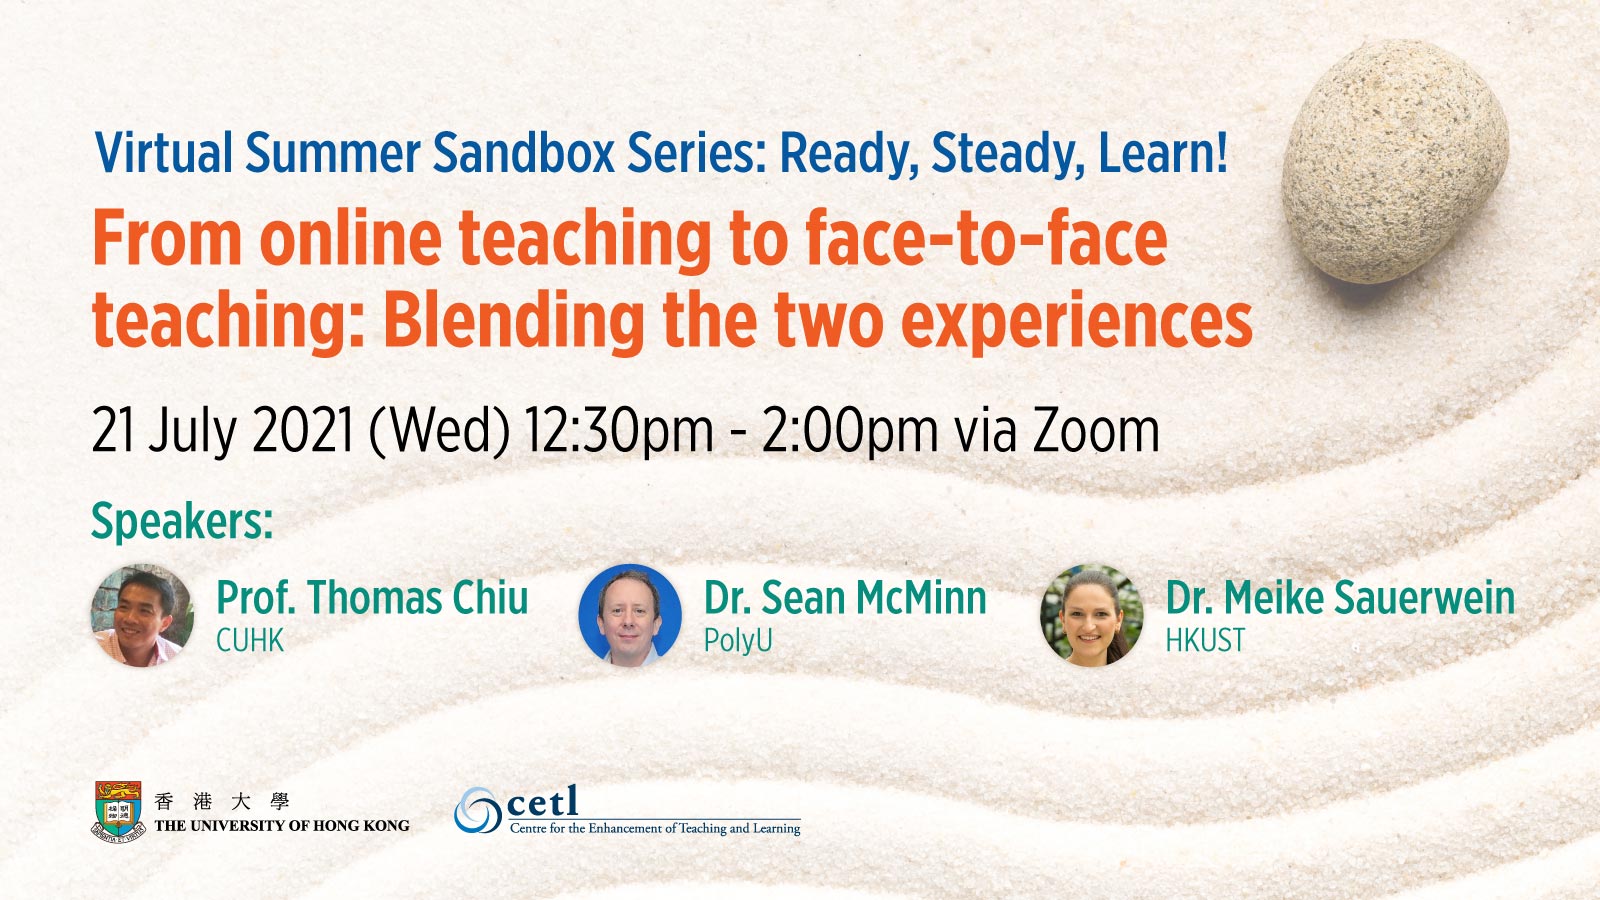 Session 1: From online teaching to face-to-face teaching: Blending the two experiences